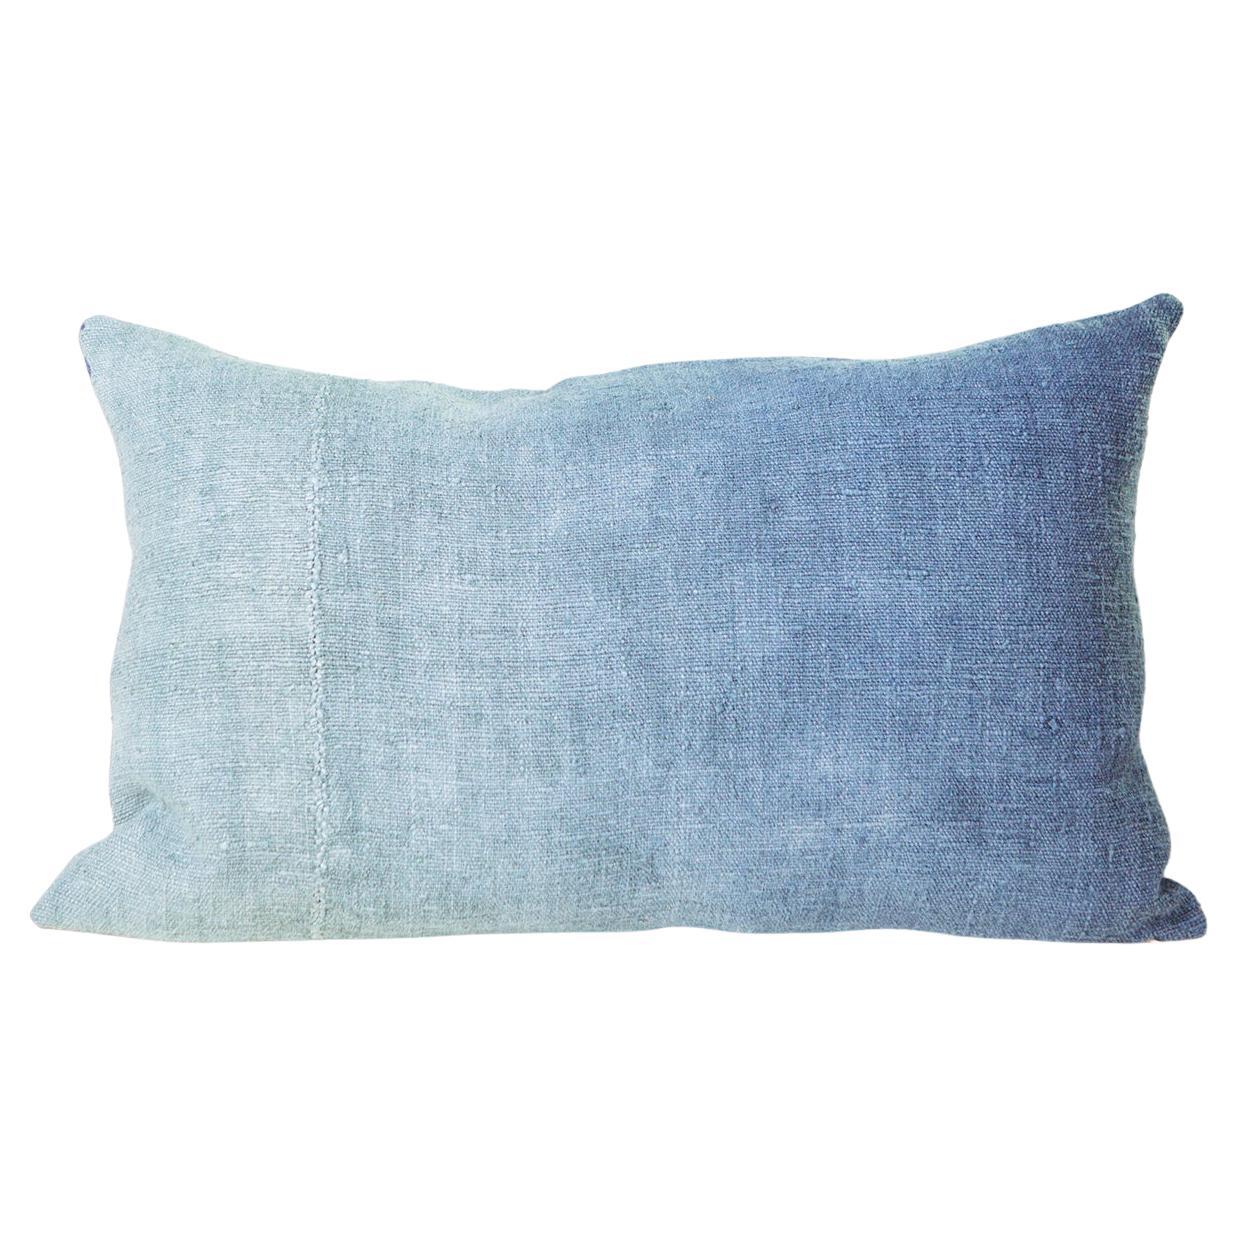 Espanyolet Hand-Painted Vintage Linen Throw Pillow in Blue 16"x26" For Sale